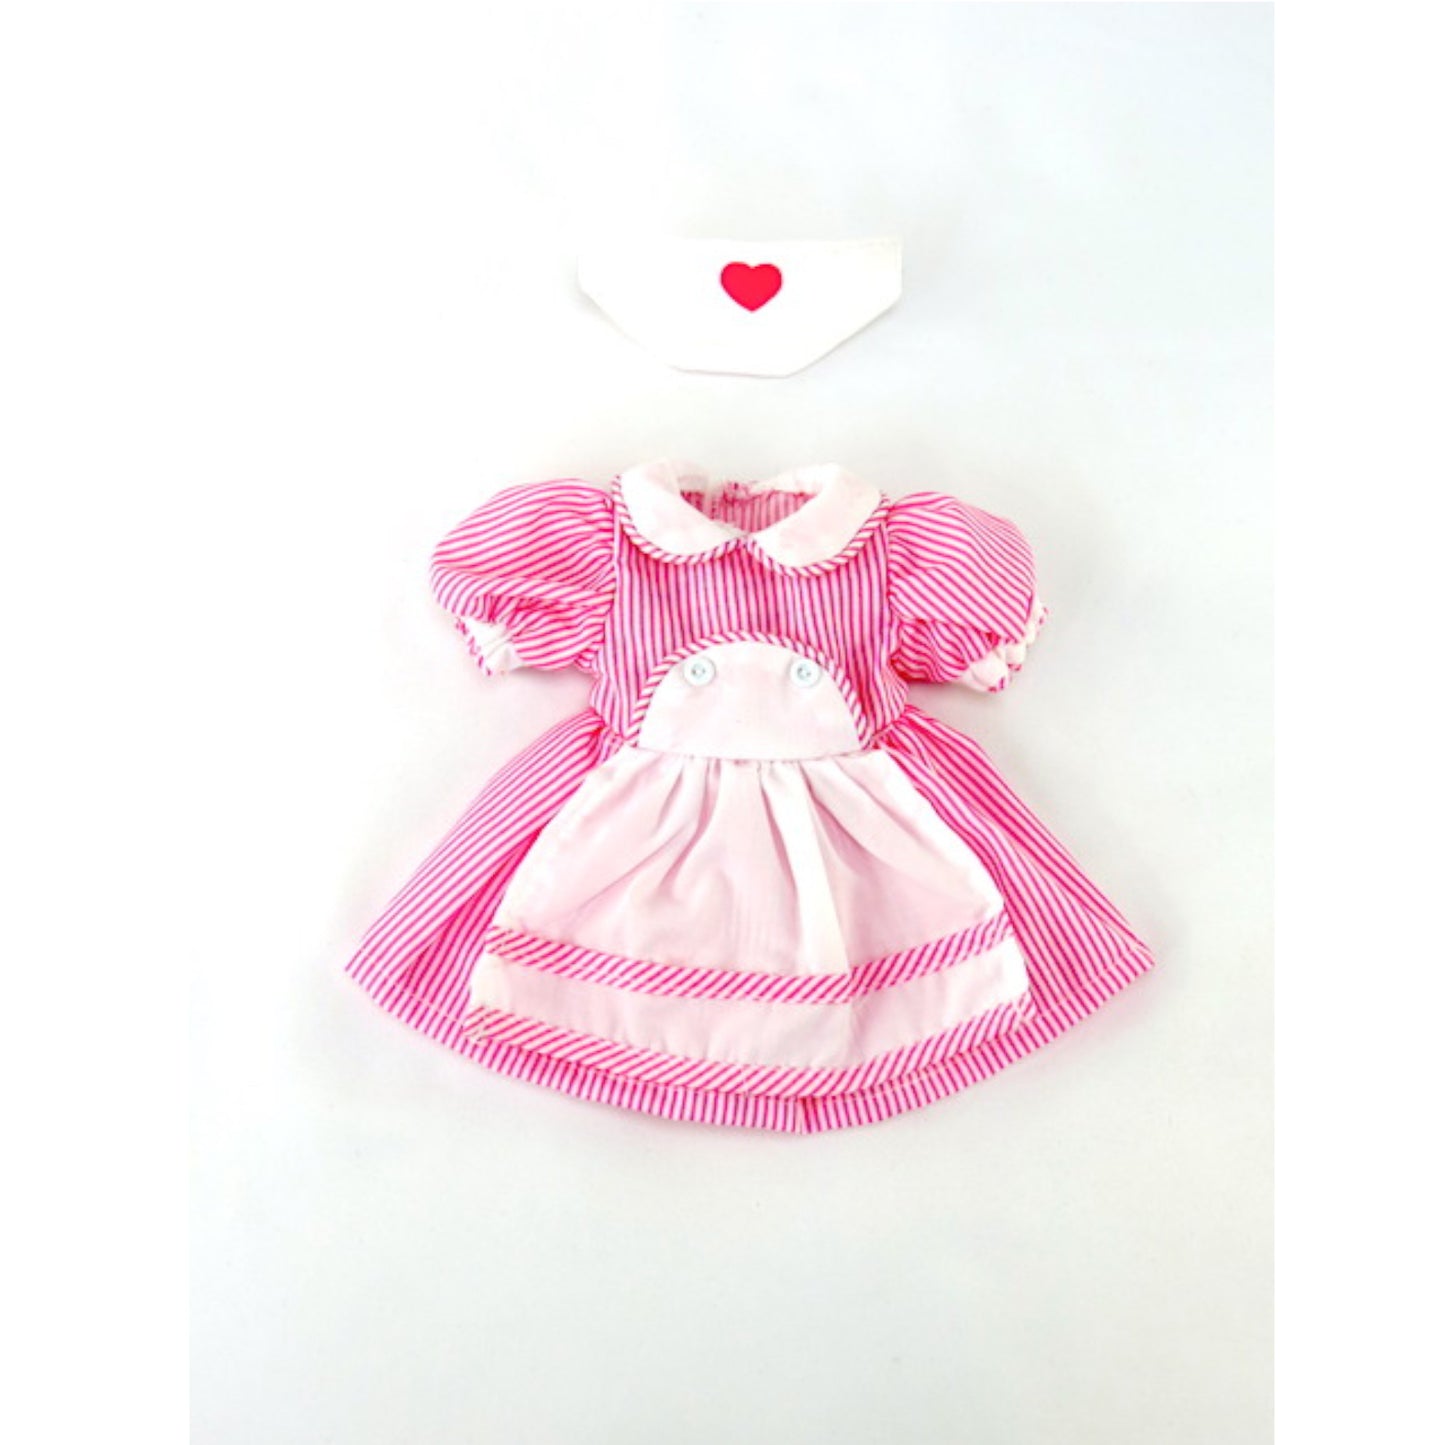 Candy Stripe Nurse Outfit for 14.5-inch dolls flat